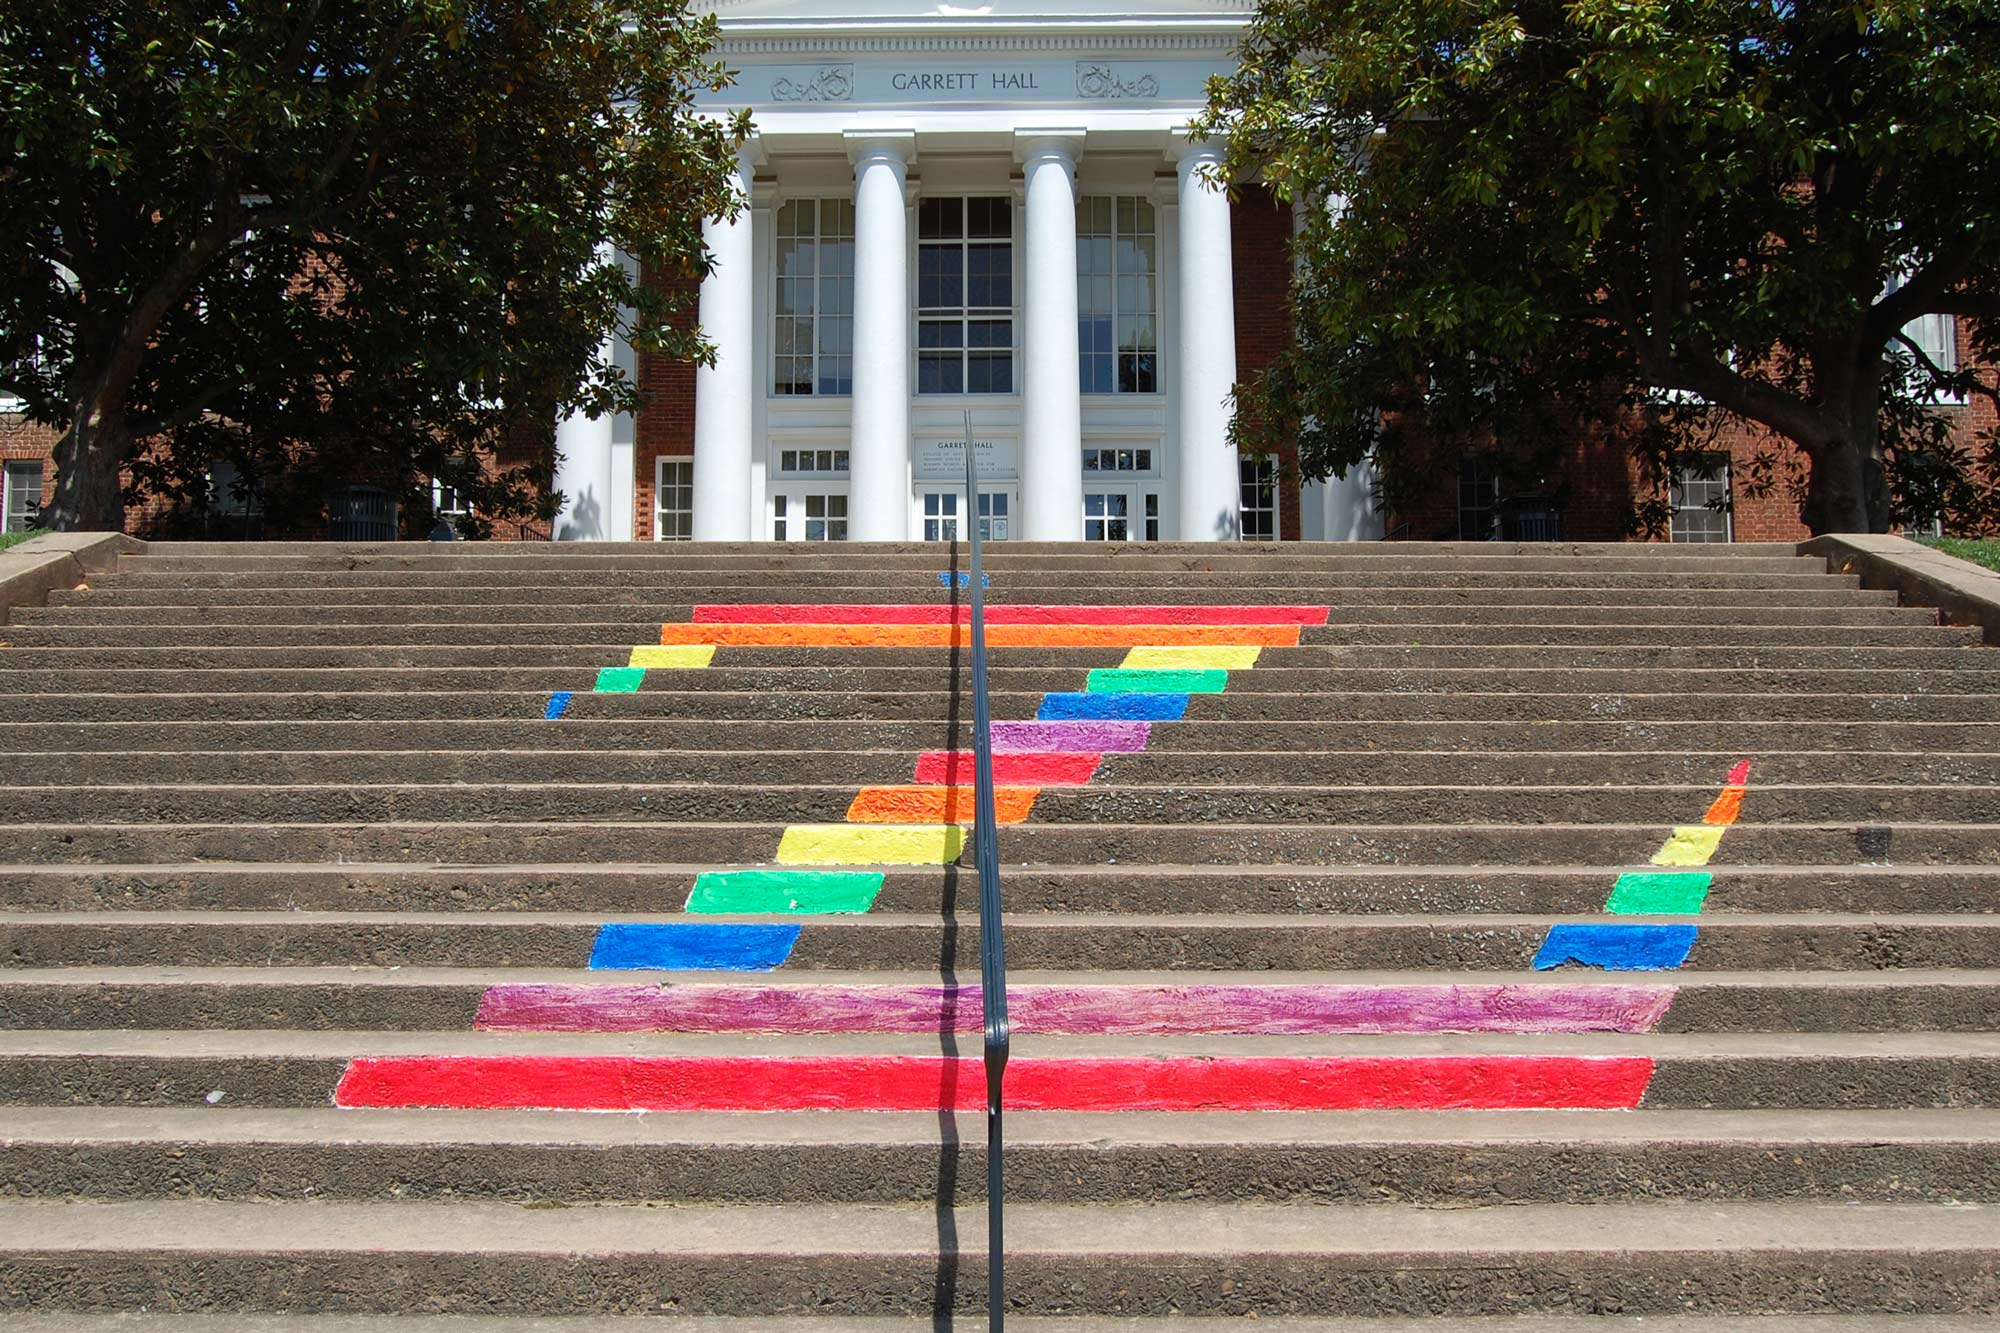 The letter Z is painted in rainbow colors on the concrete stairs leading up to Garrett Hall